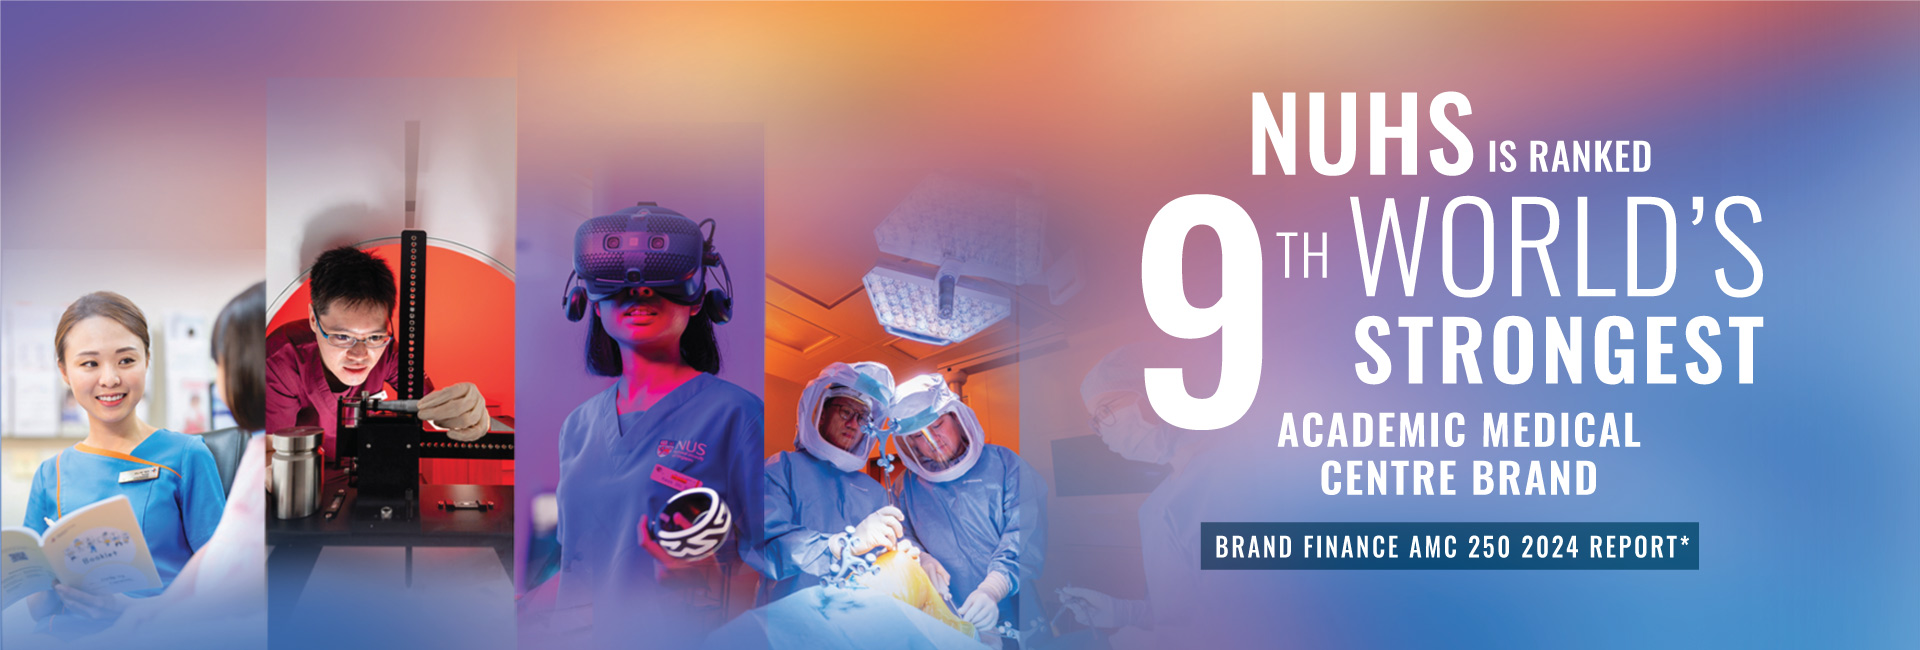 NUHS is ranked 9th as world's Academic Medical Centre by Brand Finance in 2024!